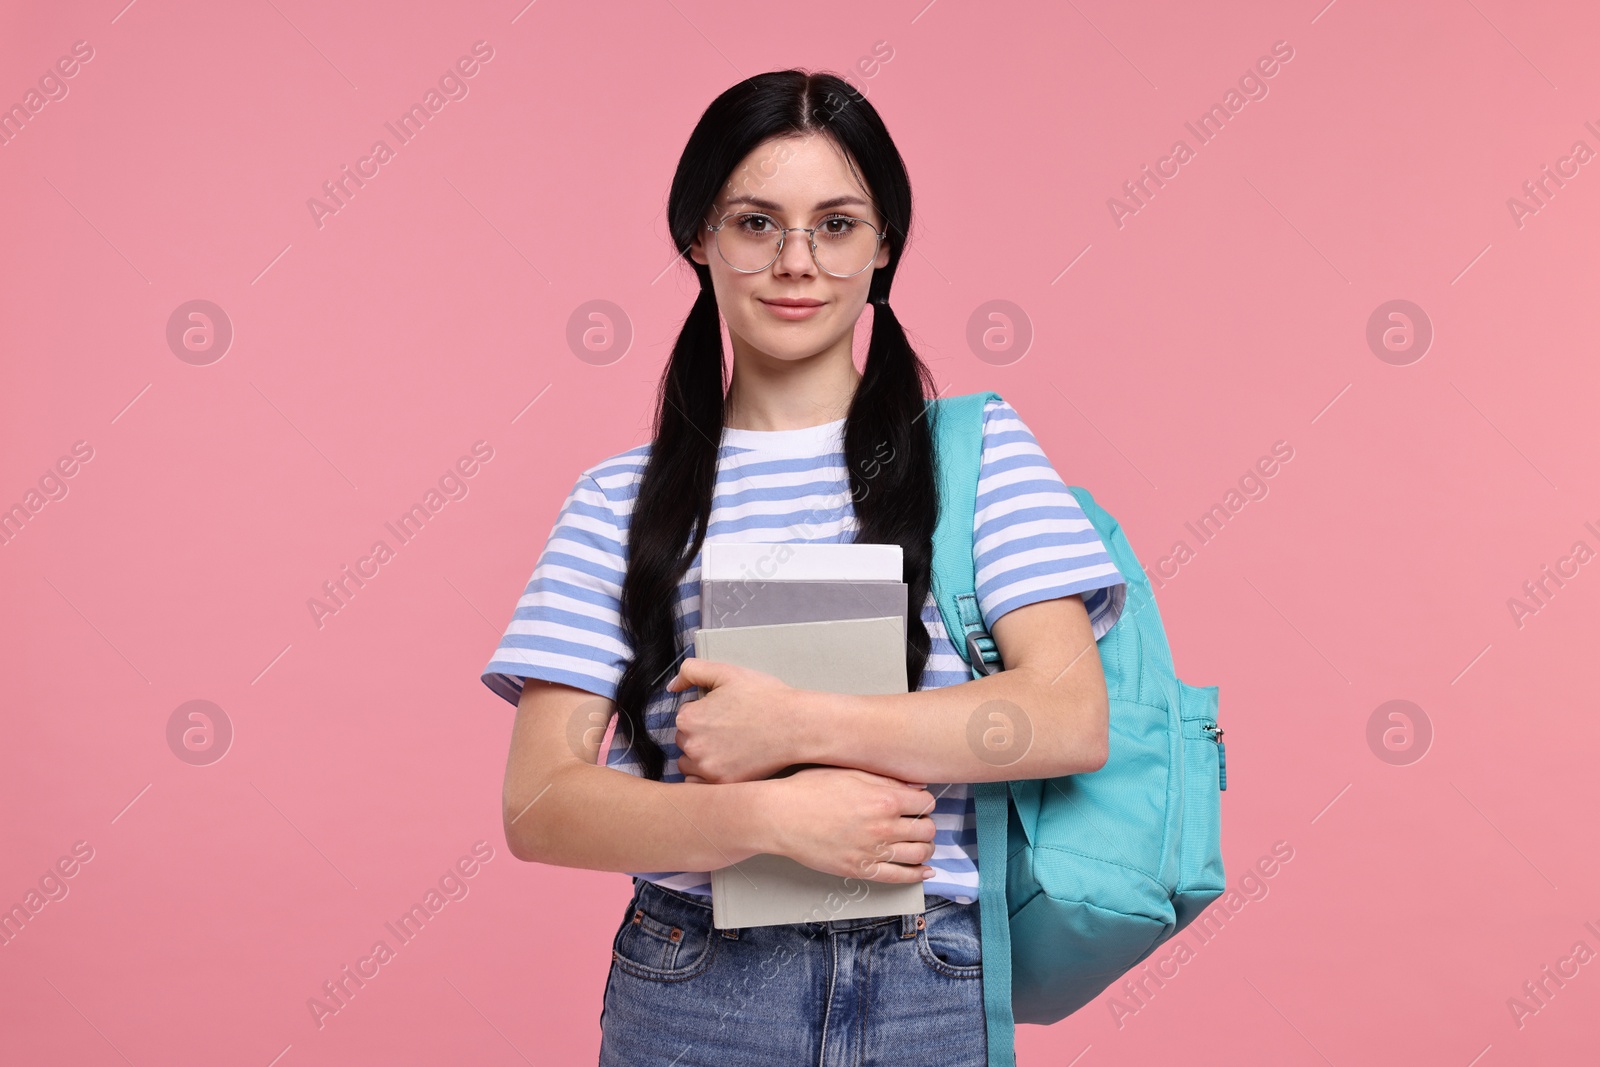 Photo of Student with books and backpack on pink background